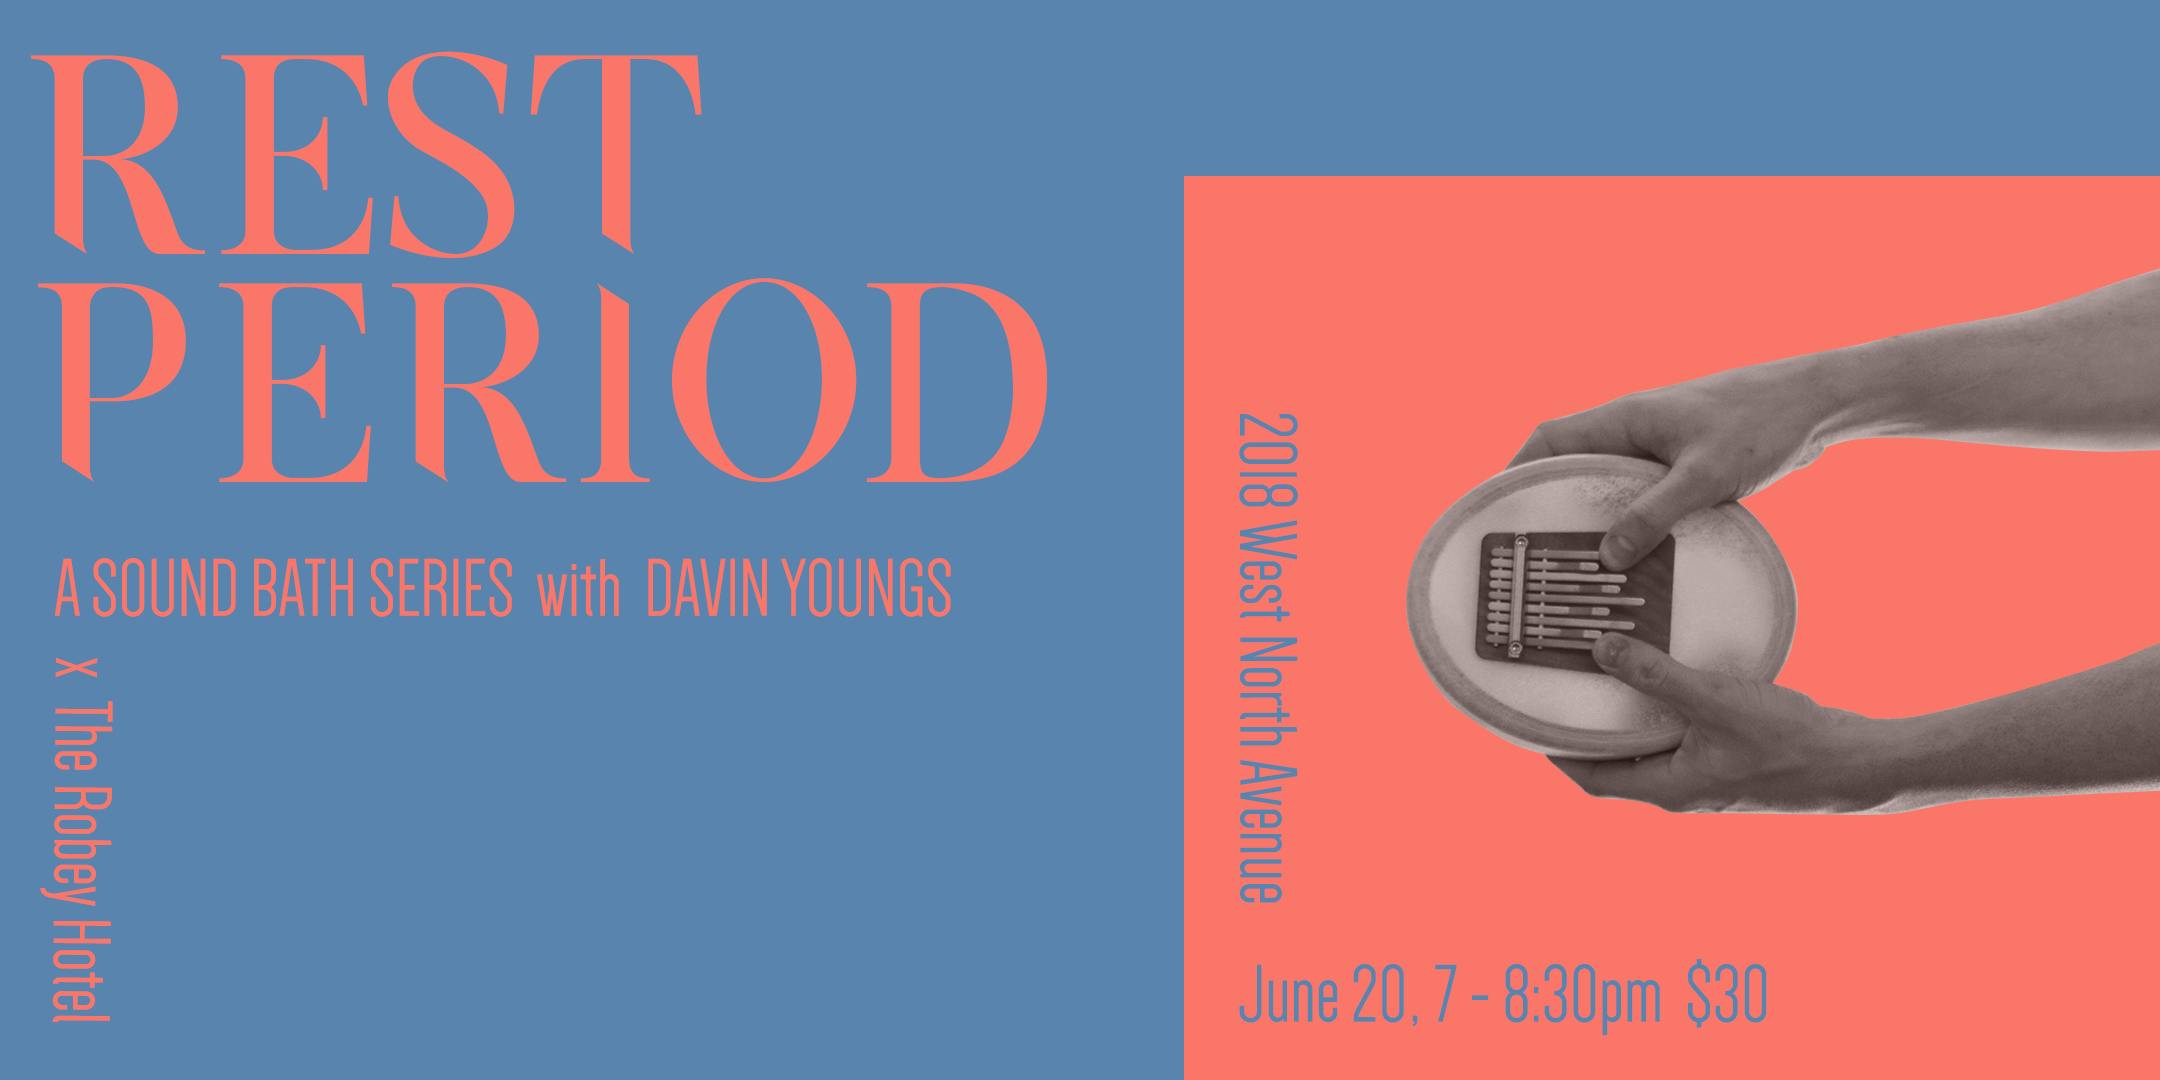 Rest Period: A Sound Bath Series with Davin Youngs